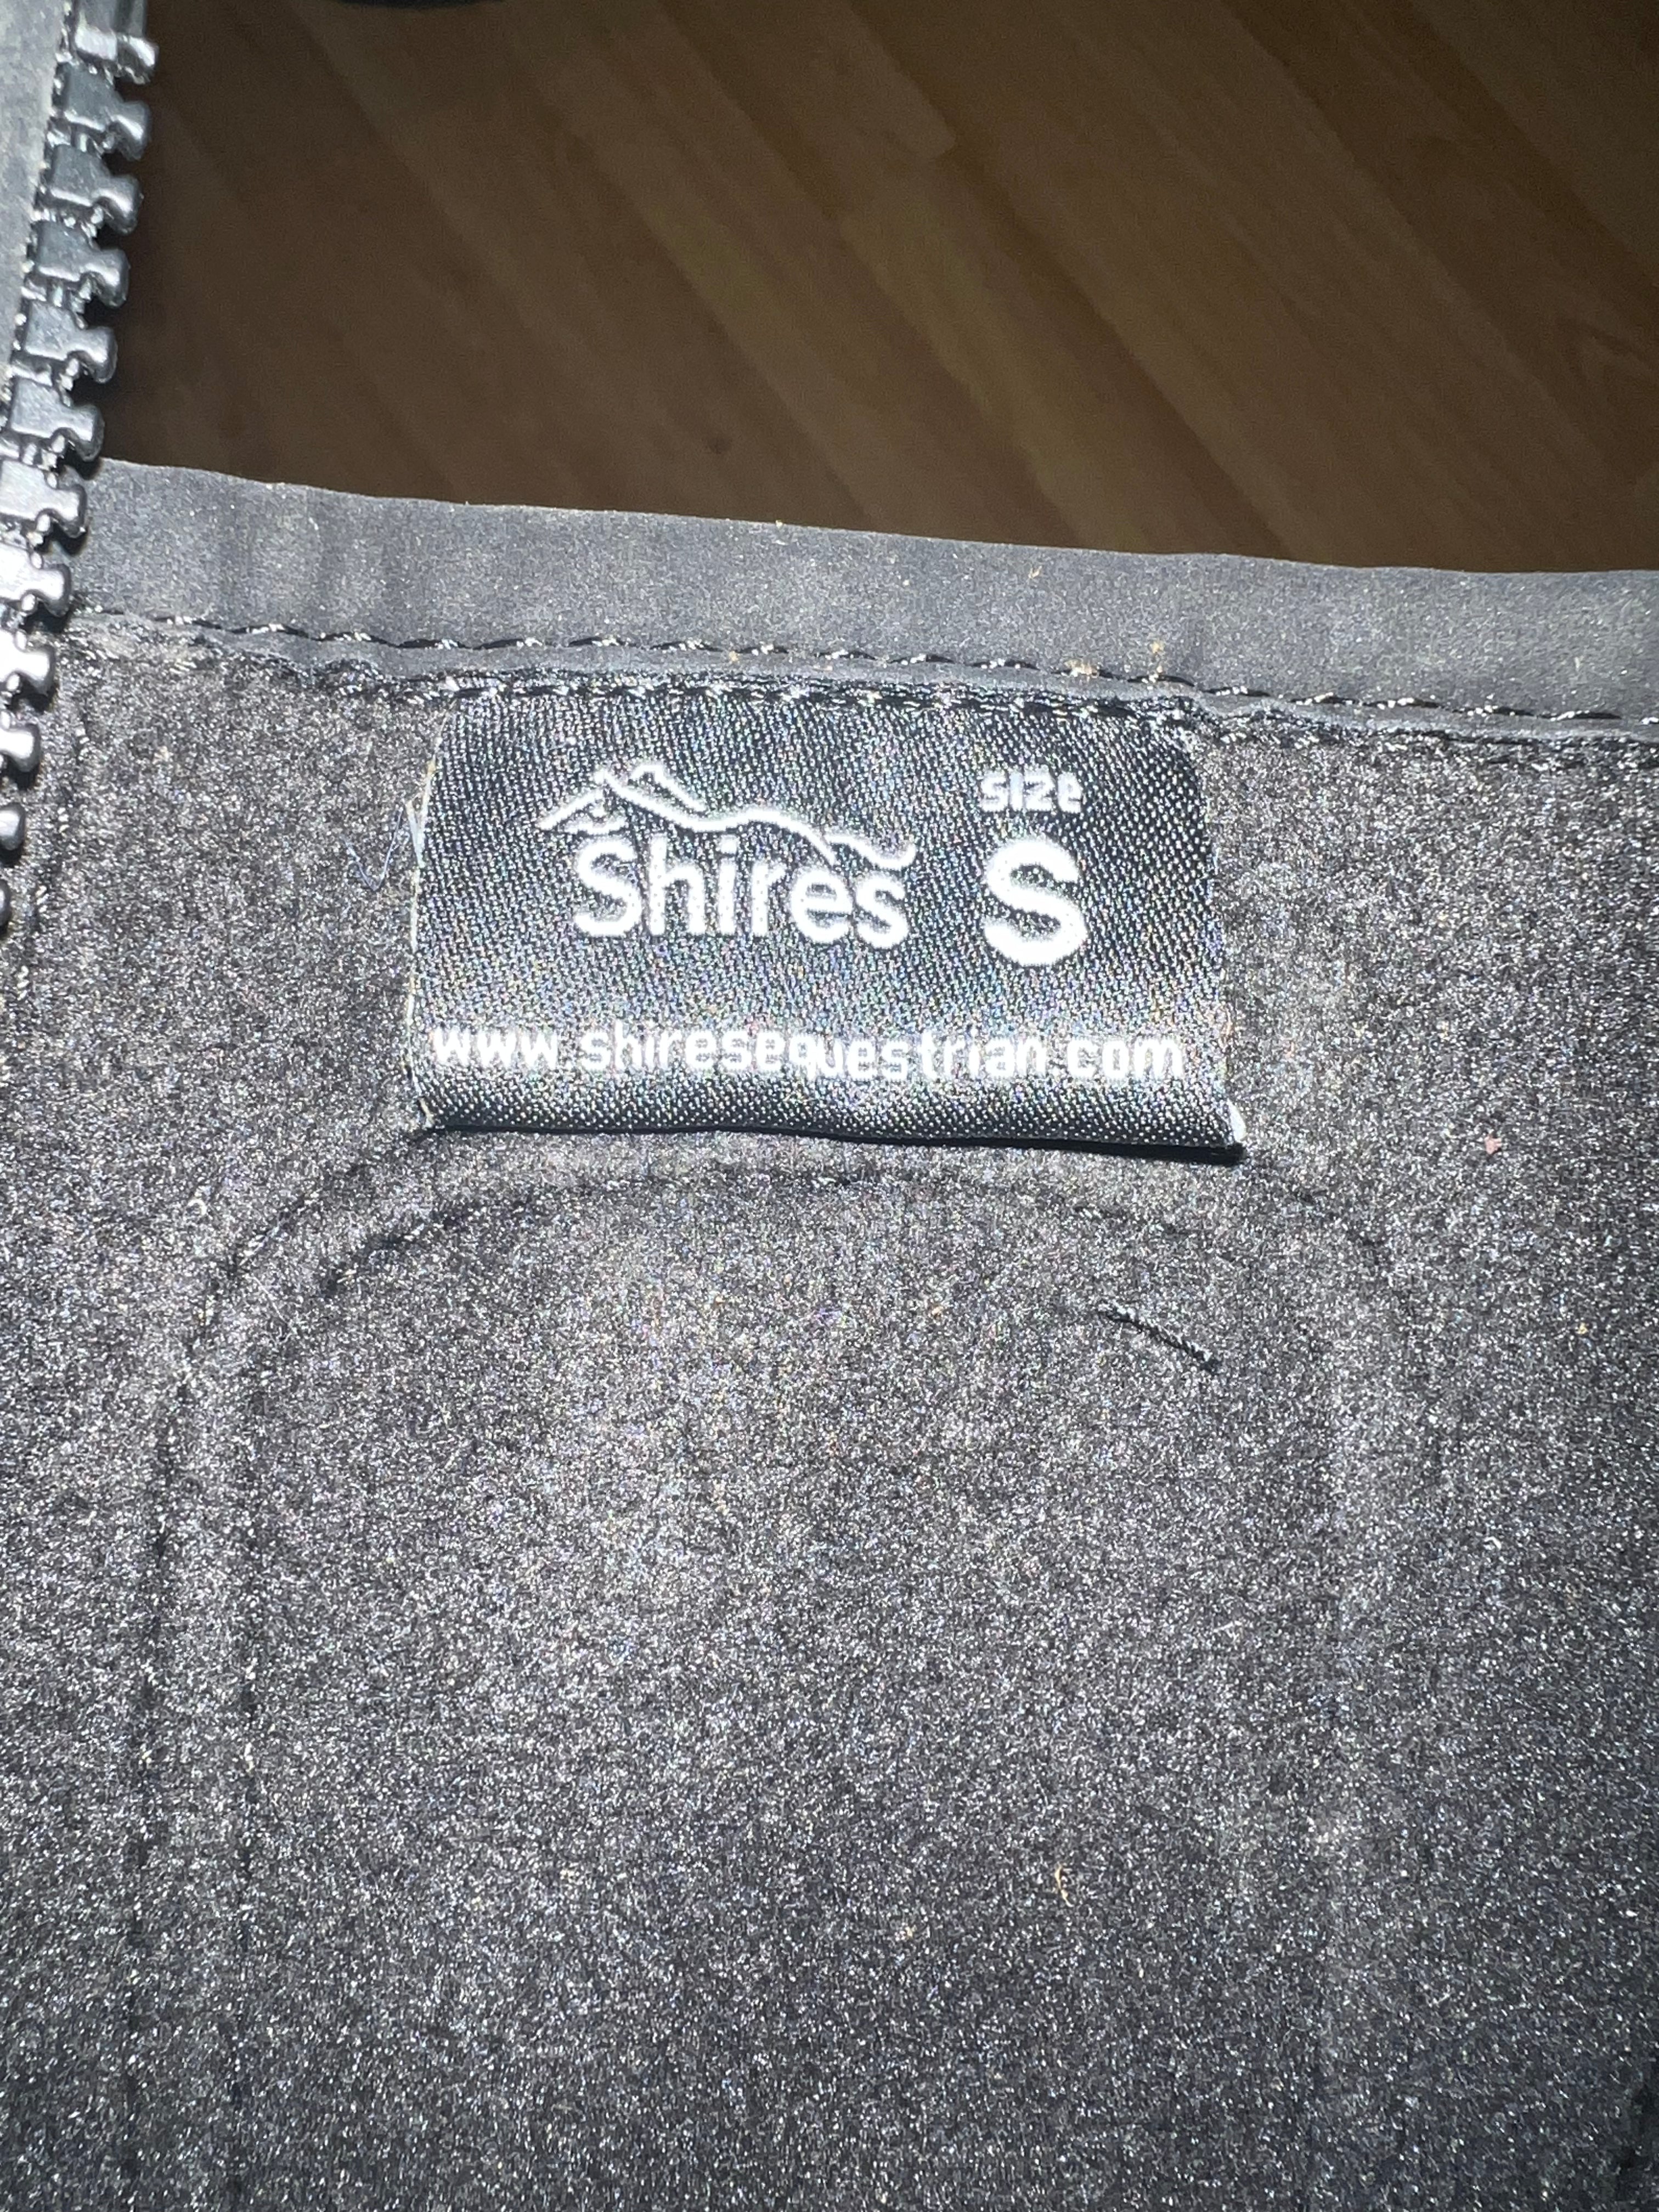 Shires Childs Small Half Chaps